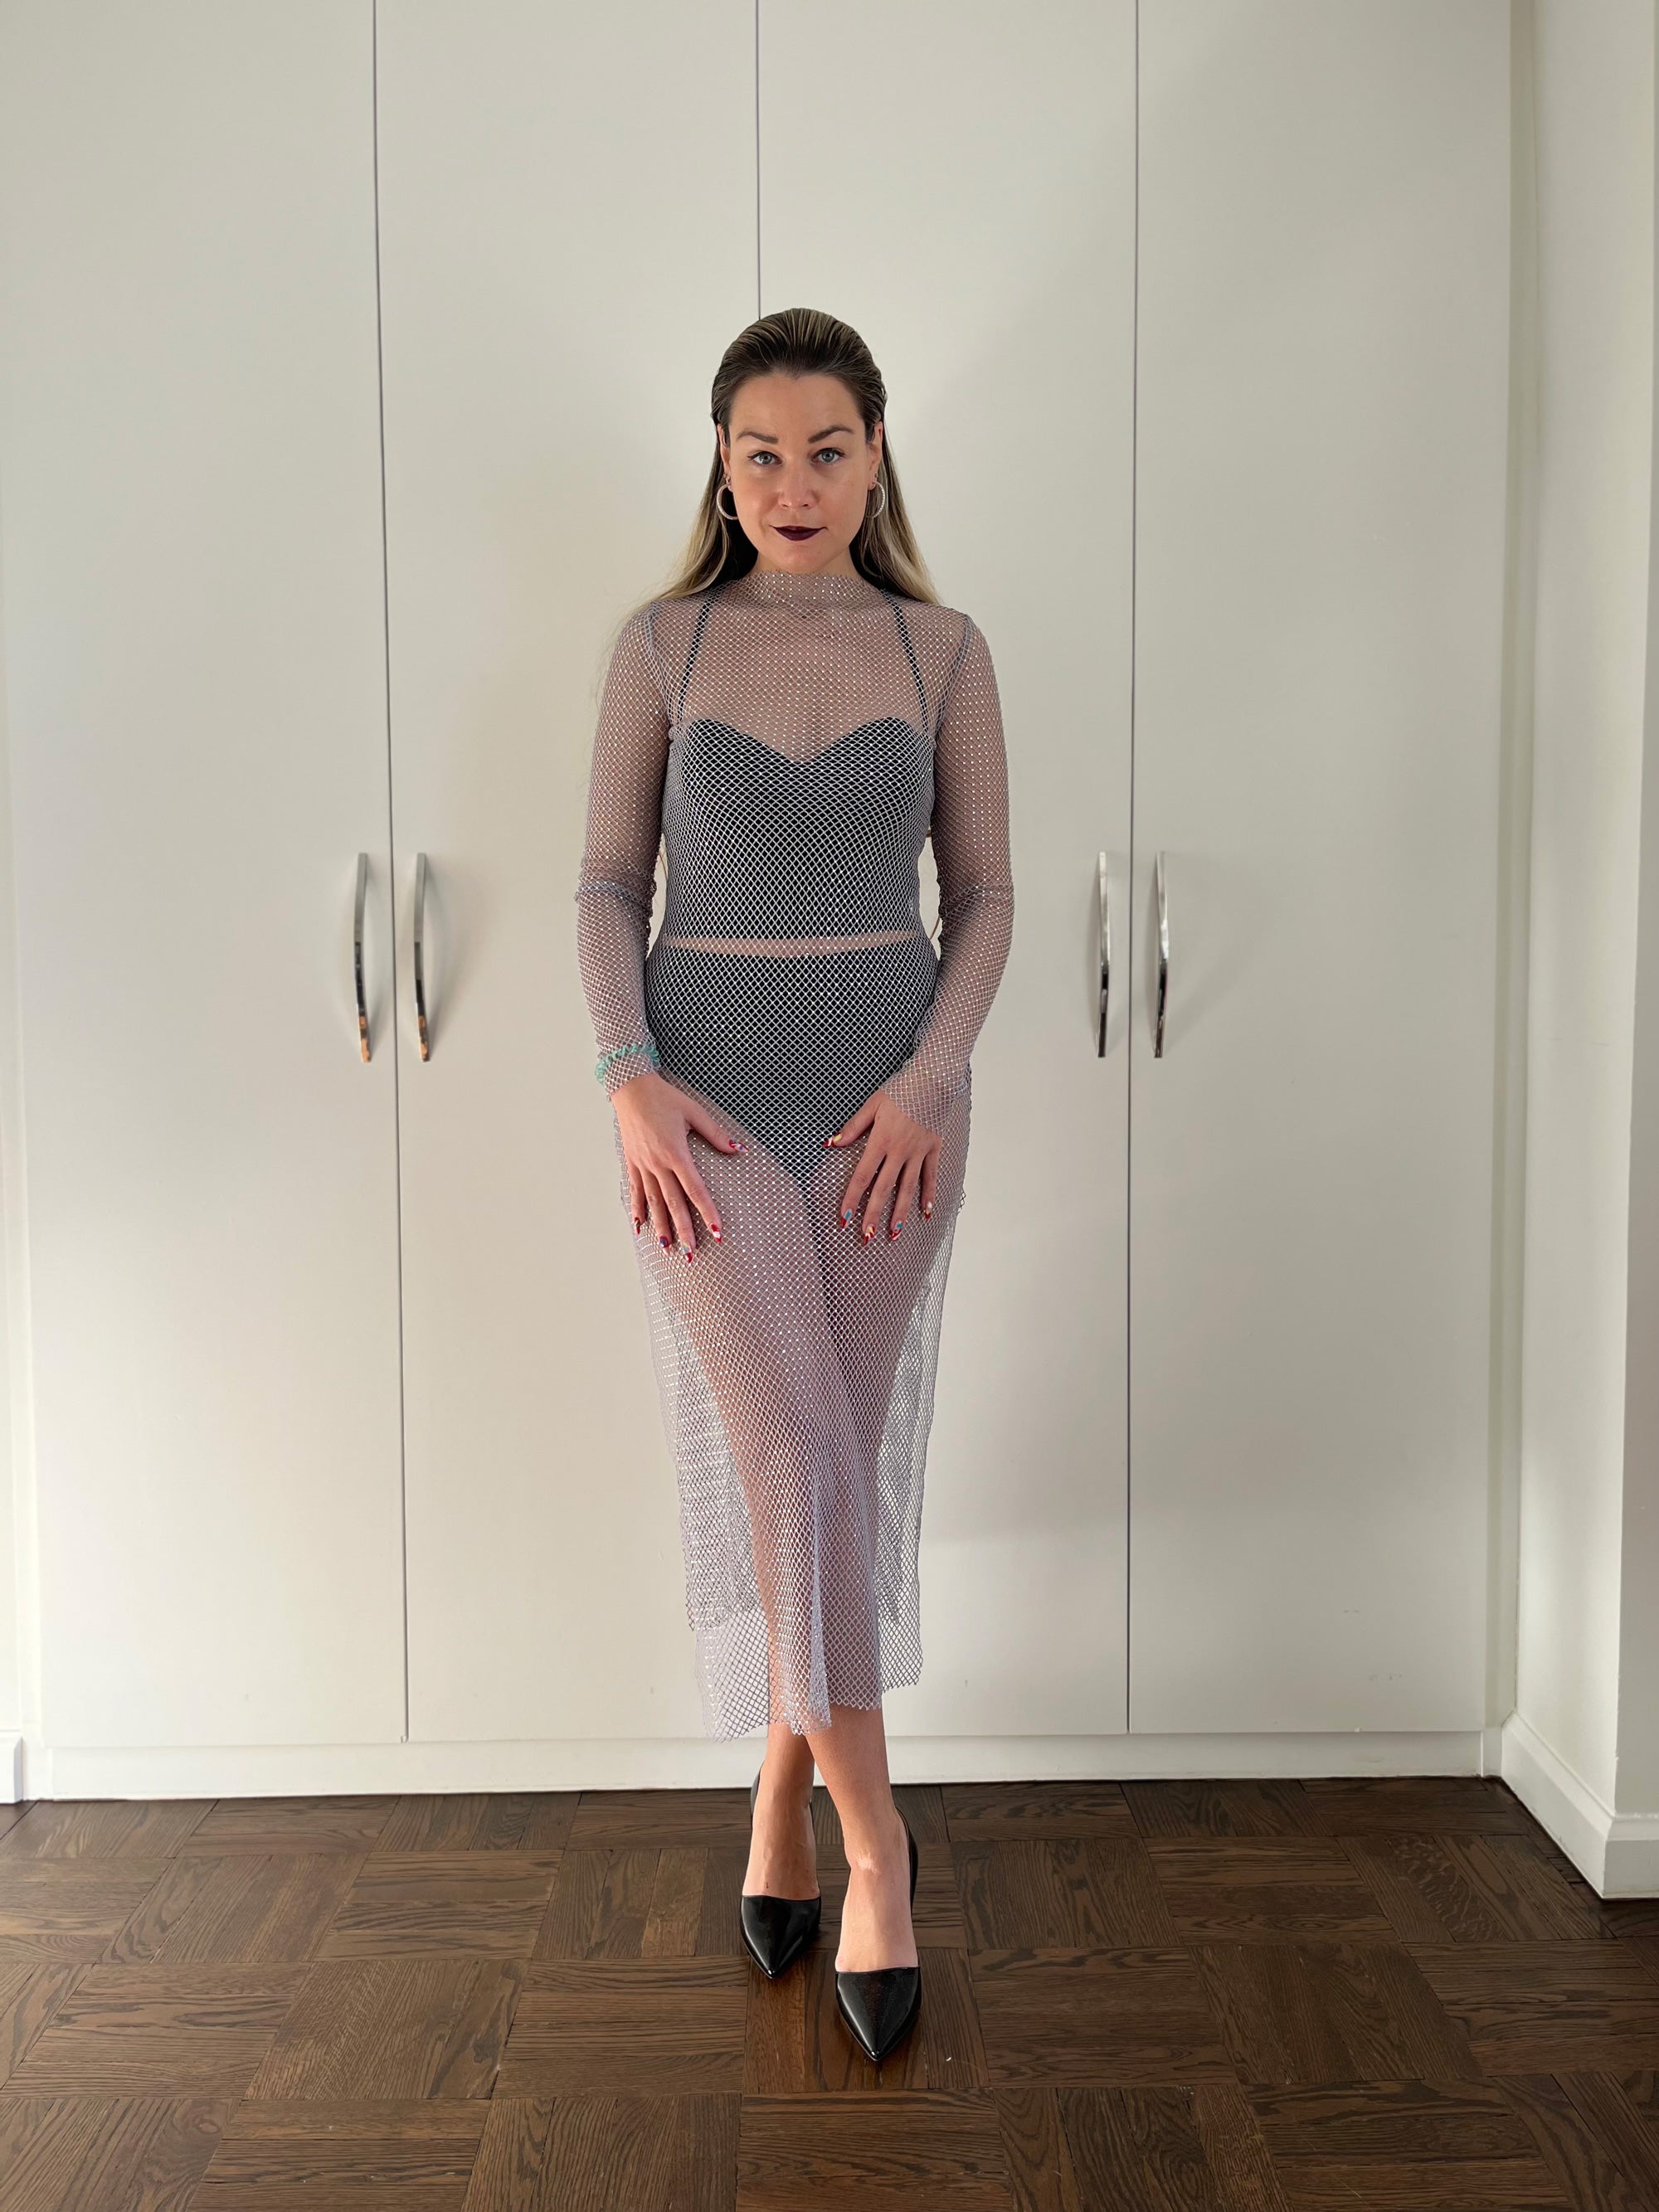 5 Wedding Guest Outfit Ideas - Karina Style Diaries